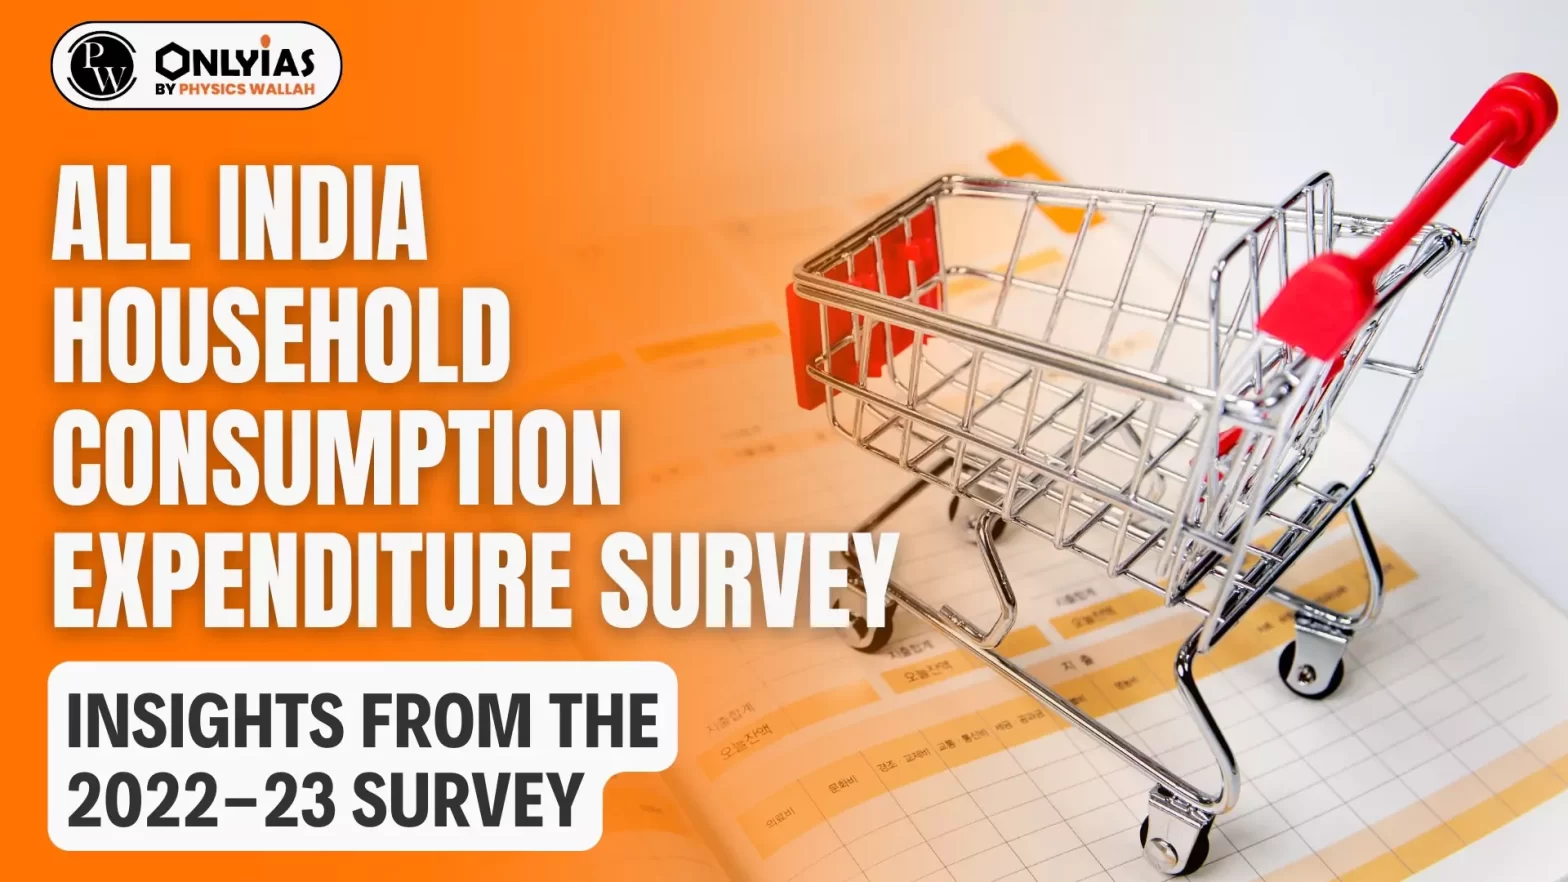 All India Household Consumption Expenditure Survey: Insights from the 2022-23 Survey